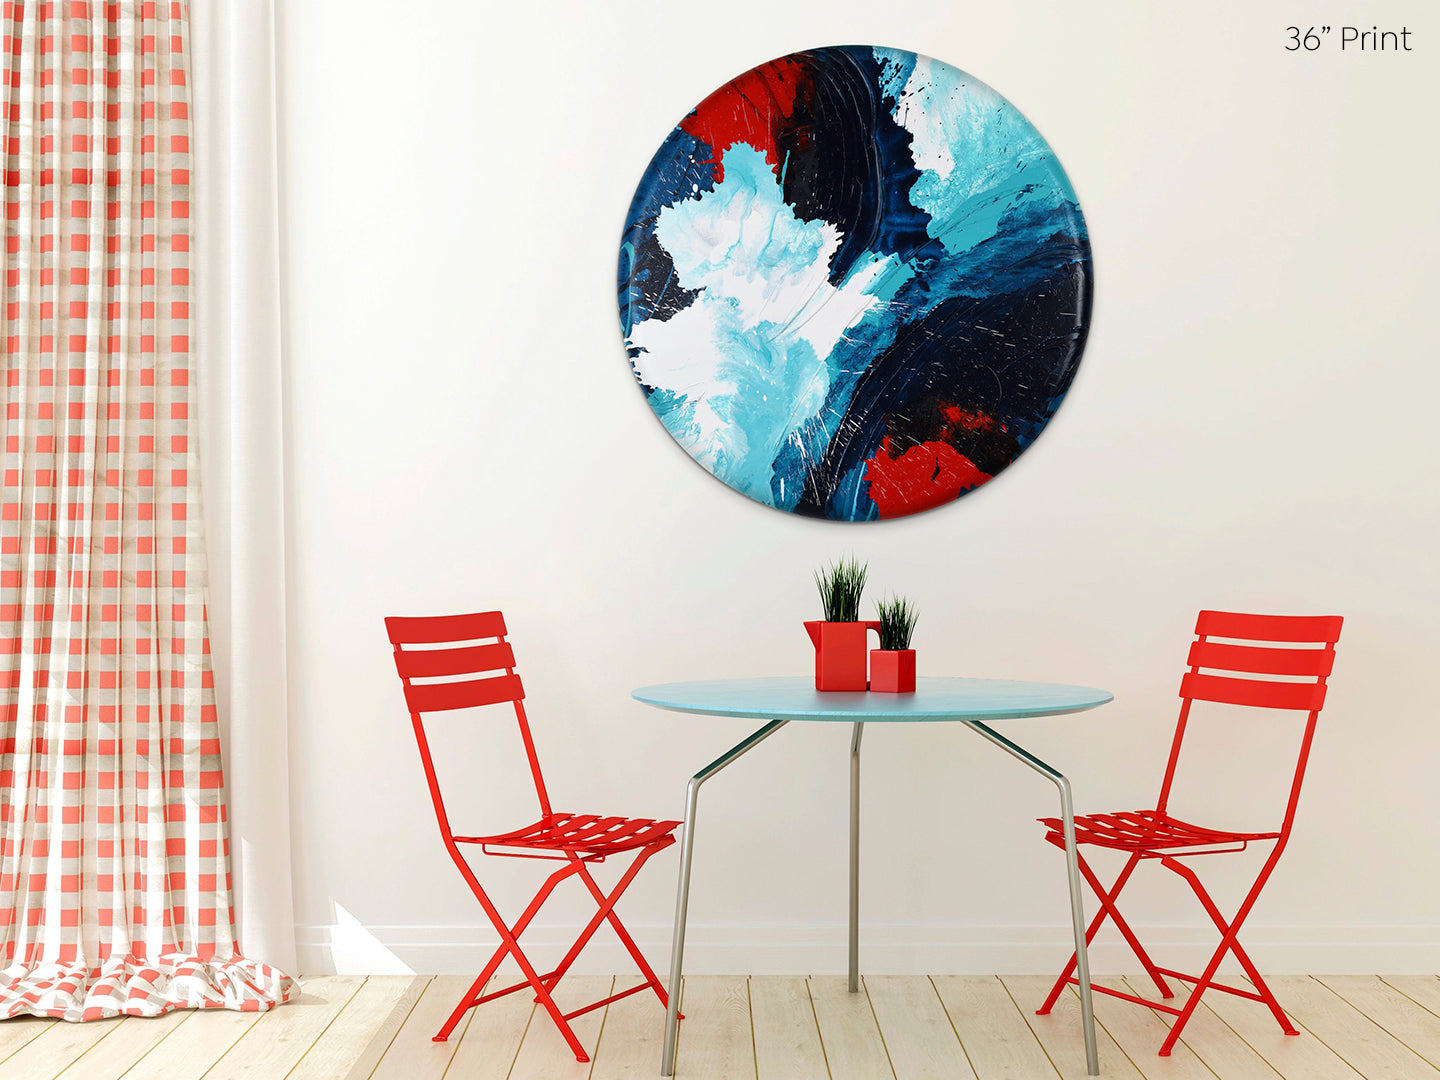 Abstract, expressionism, acrylic 36” giclee print: overlapping explosions of dark blue, turquoise, bright red and white on a medium white dining room wall above a retro red and turquoise dining table set